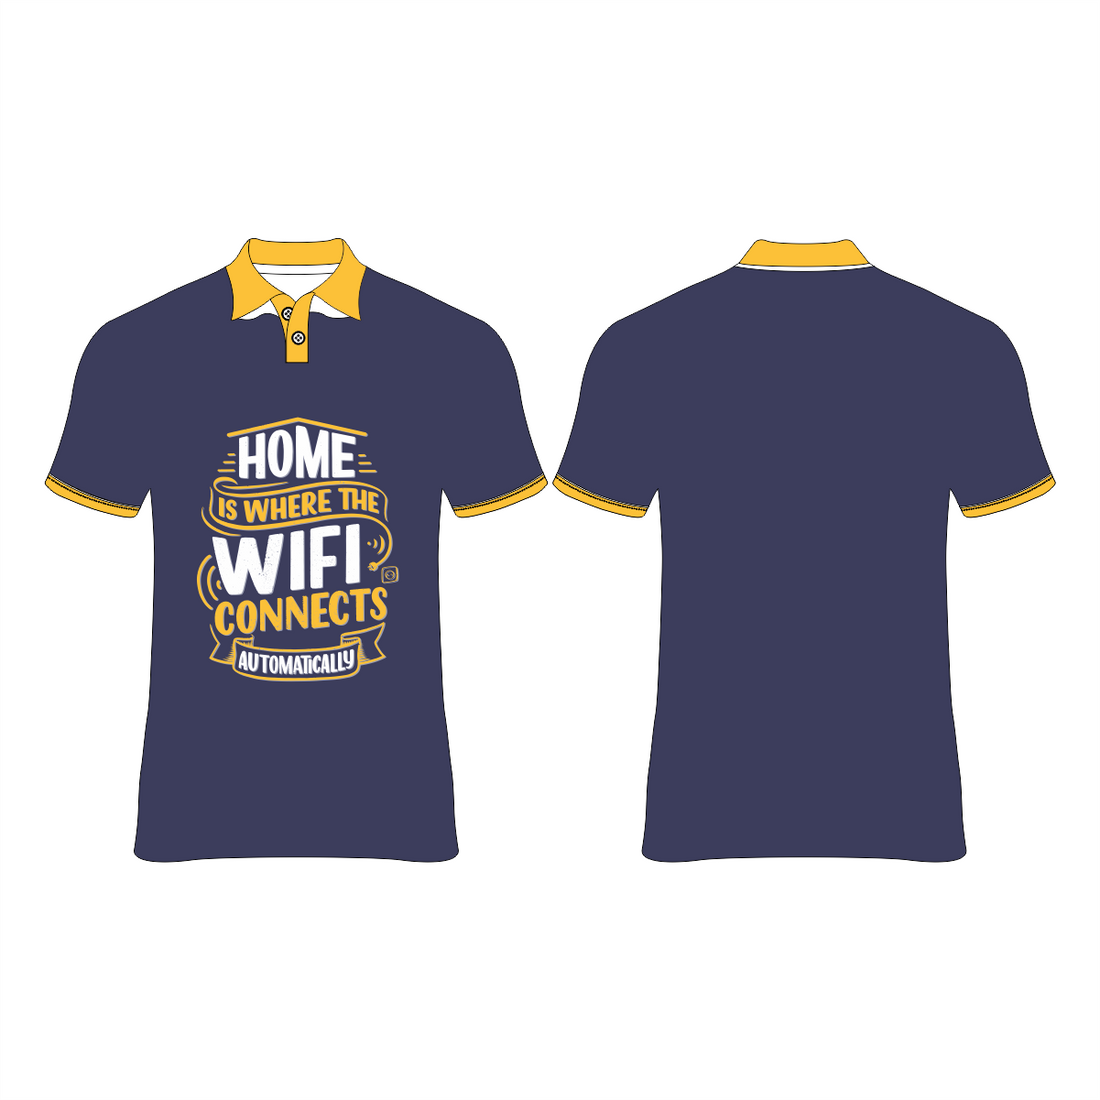 HOME IS WHERE THE WIFI CONNECTS AUTOMATICALLY PRINTED T-SHIRT